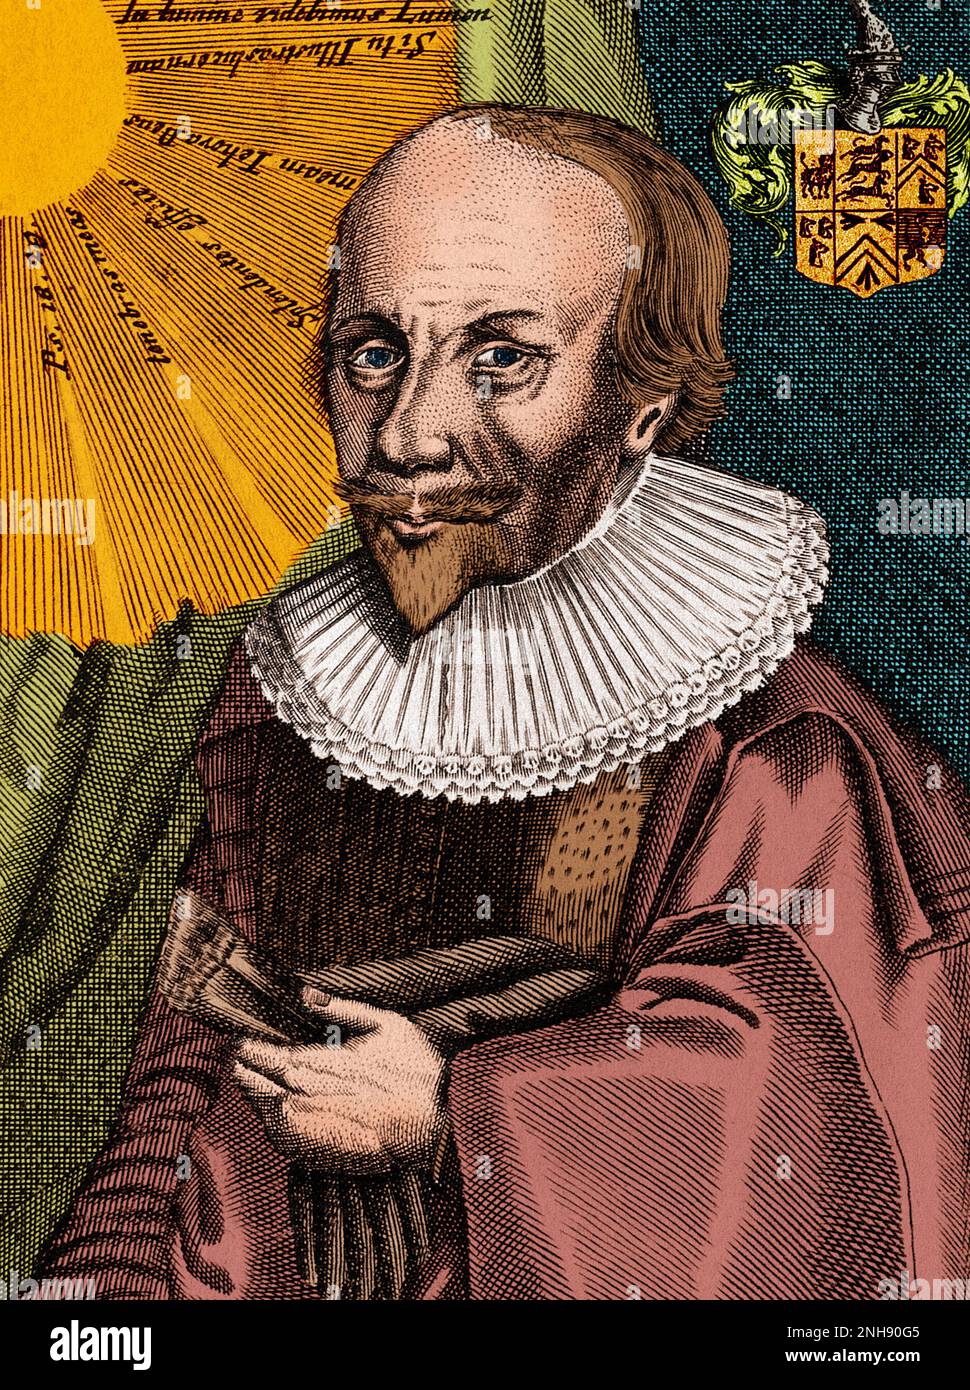 Robert Fludd, also known as Robertus de Fluctibus (1574-1637), was an English Paracelsian physician with both scientific and occult interests. He is remembered as an astrologer, mathematician, cosmologist, Kabbalist and Rosicrucian. Colorized. Stock Photo